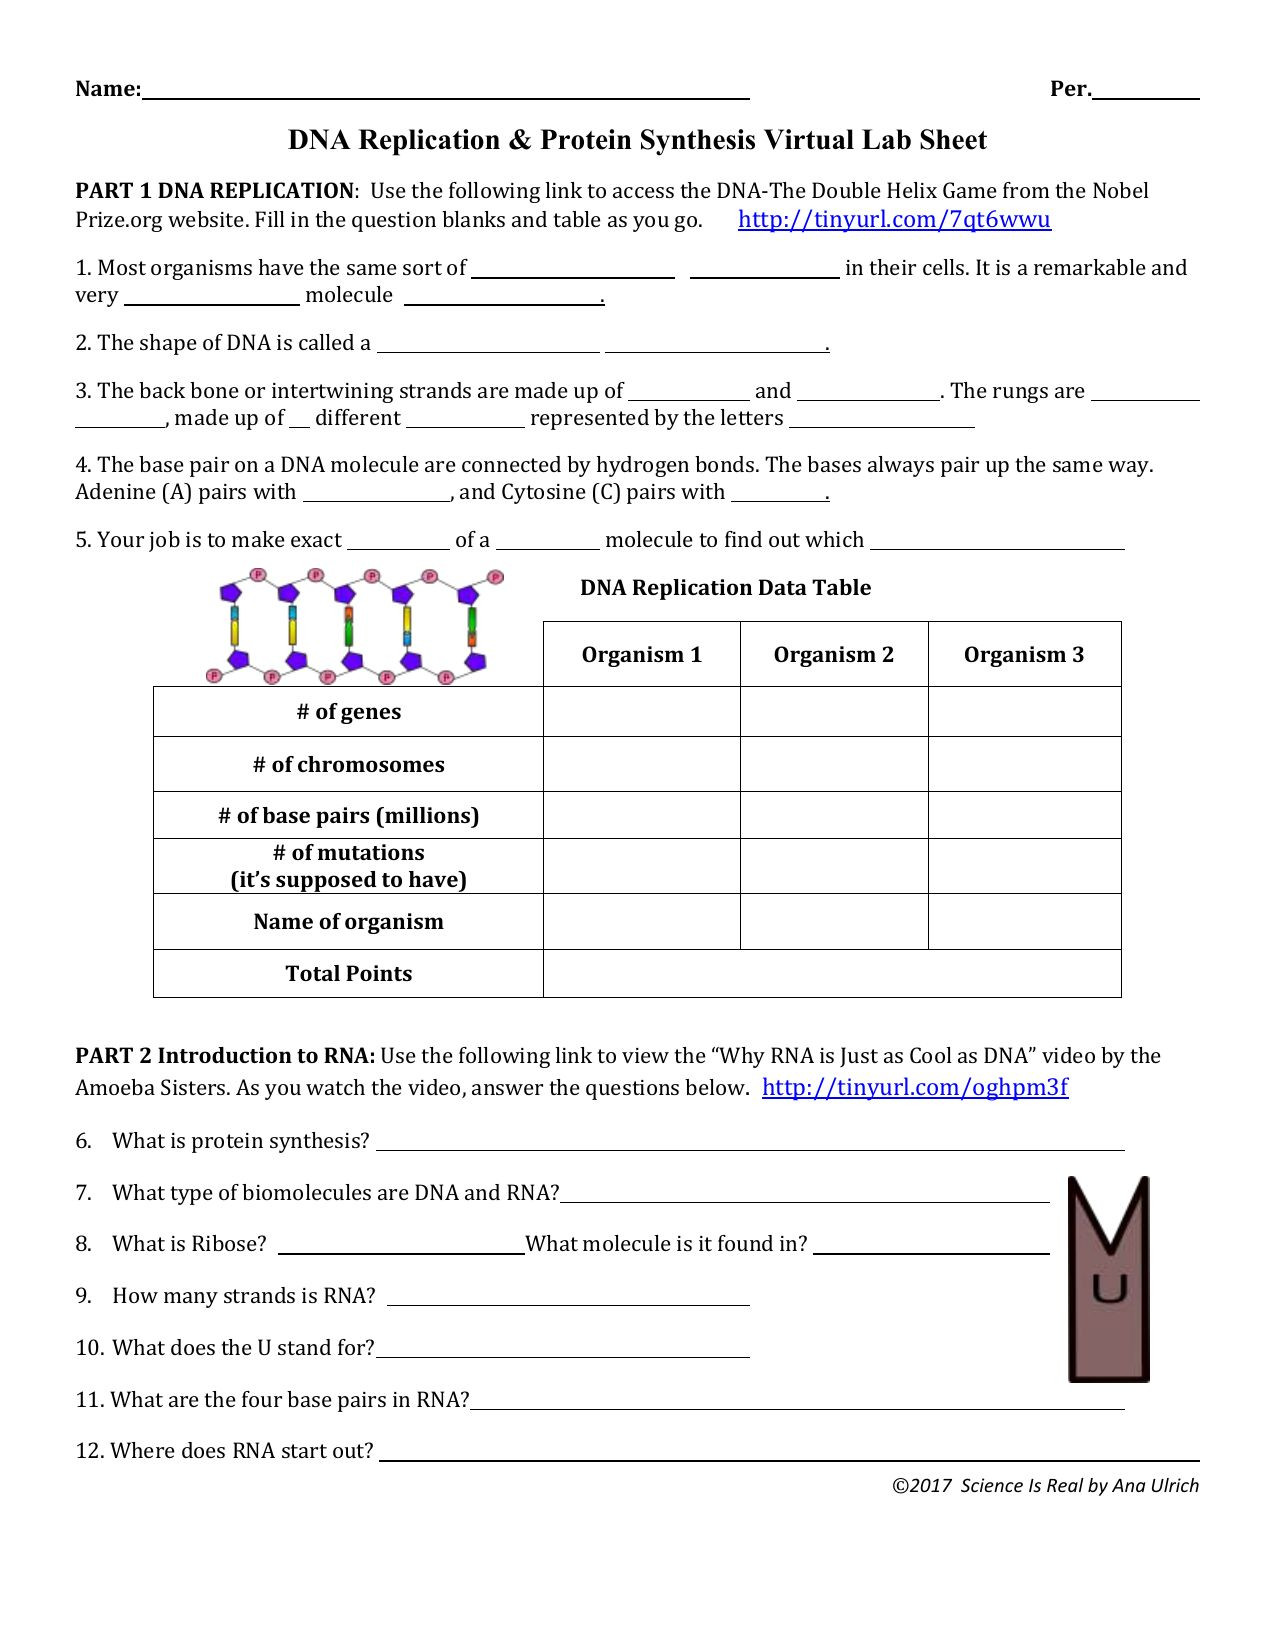 Protein Synthesis Review Worksheet Dna Replication Protein Synthesis Worksheet